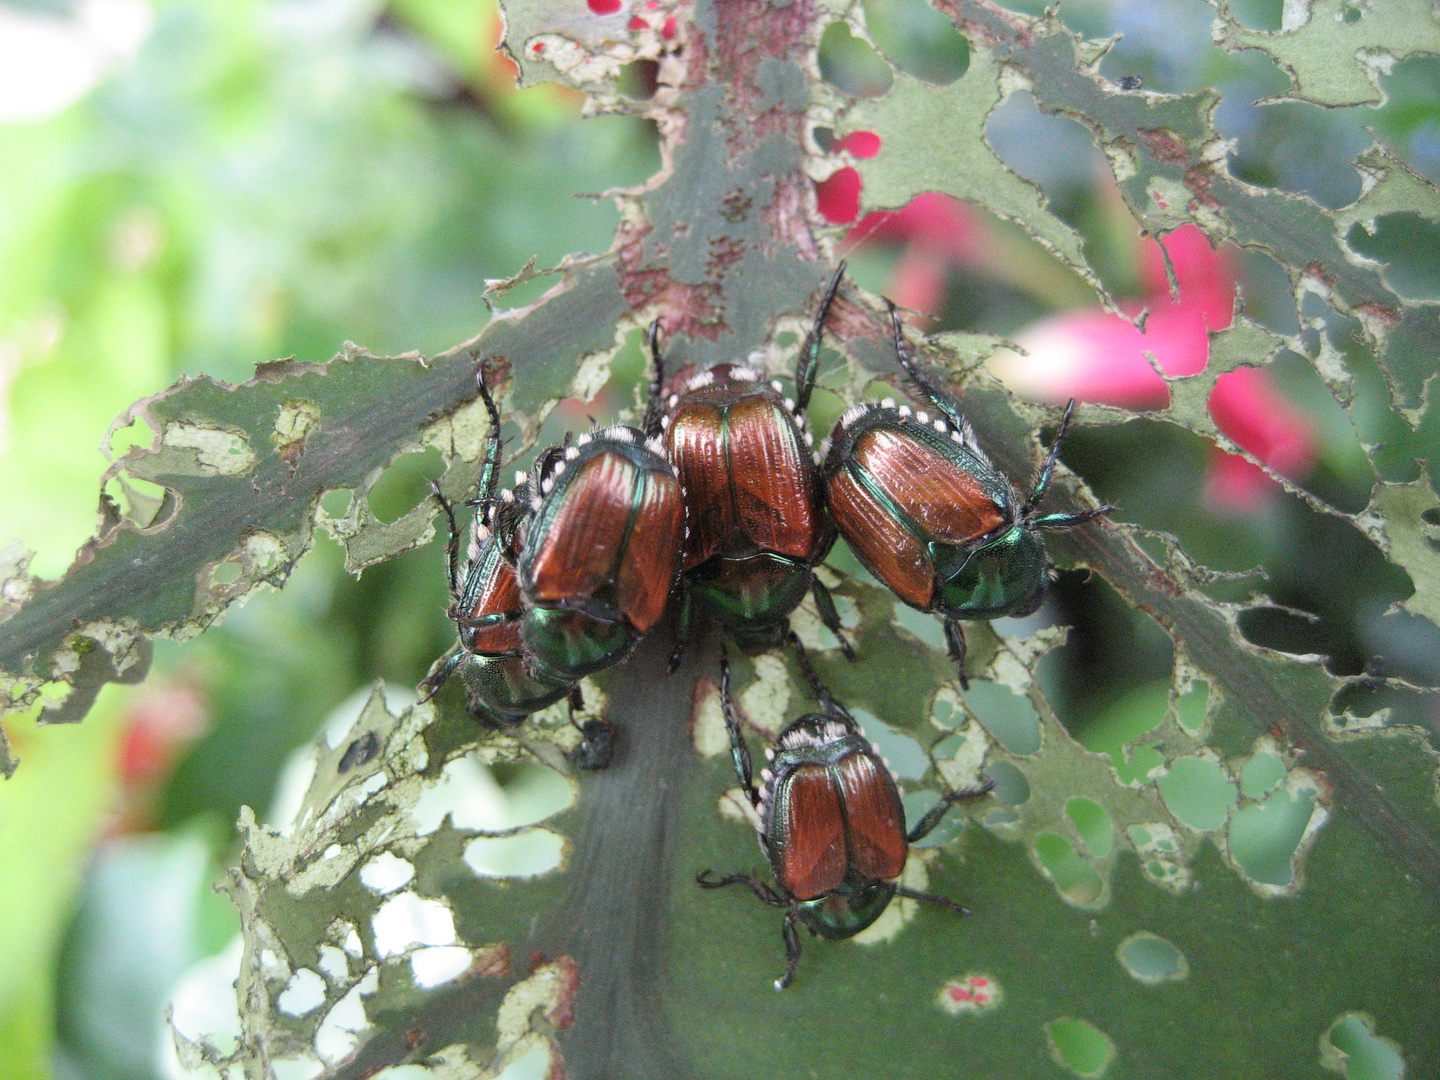 The Japanese Beetle